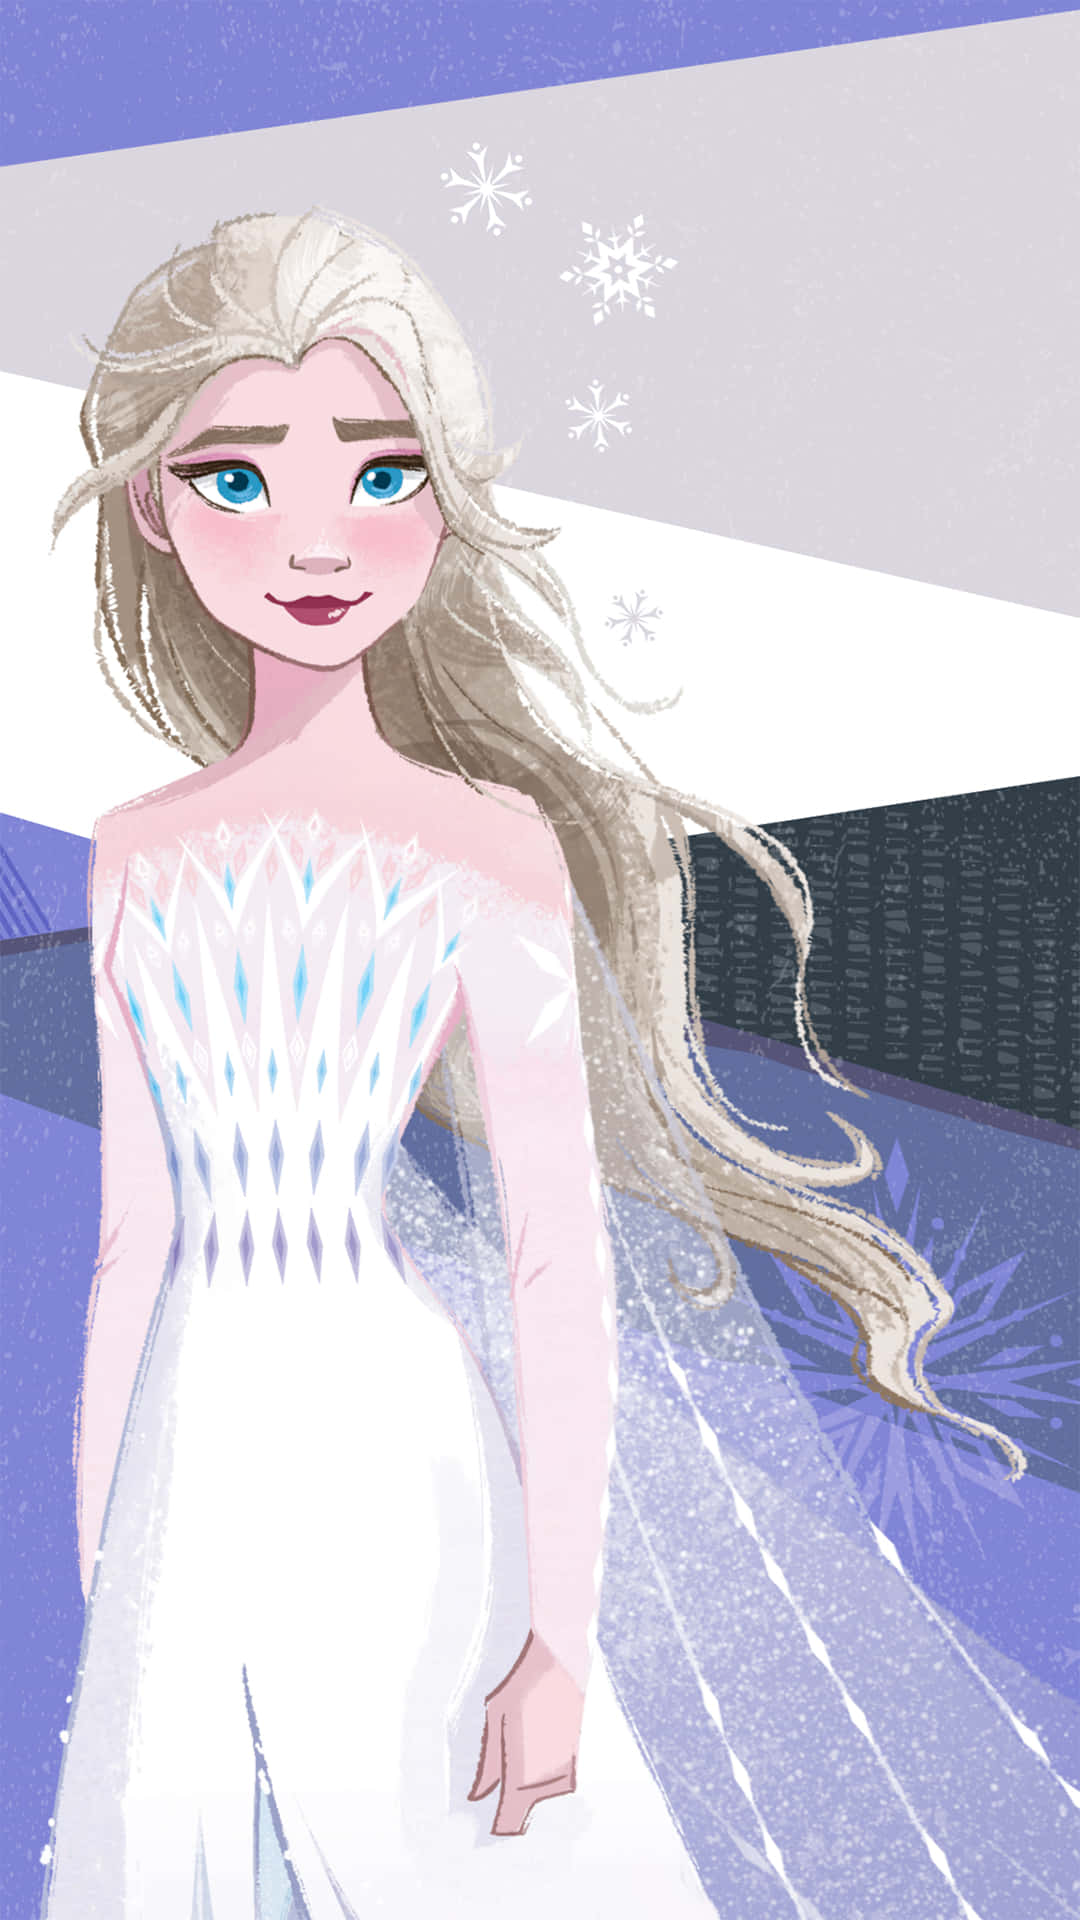 "The gorgeous Elsa wearing her signature white dress from the movie Frozen 2" Wallpaper